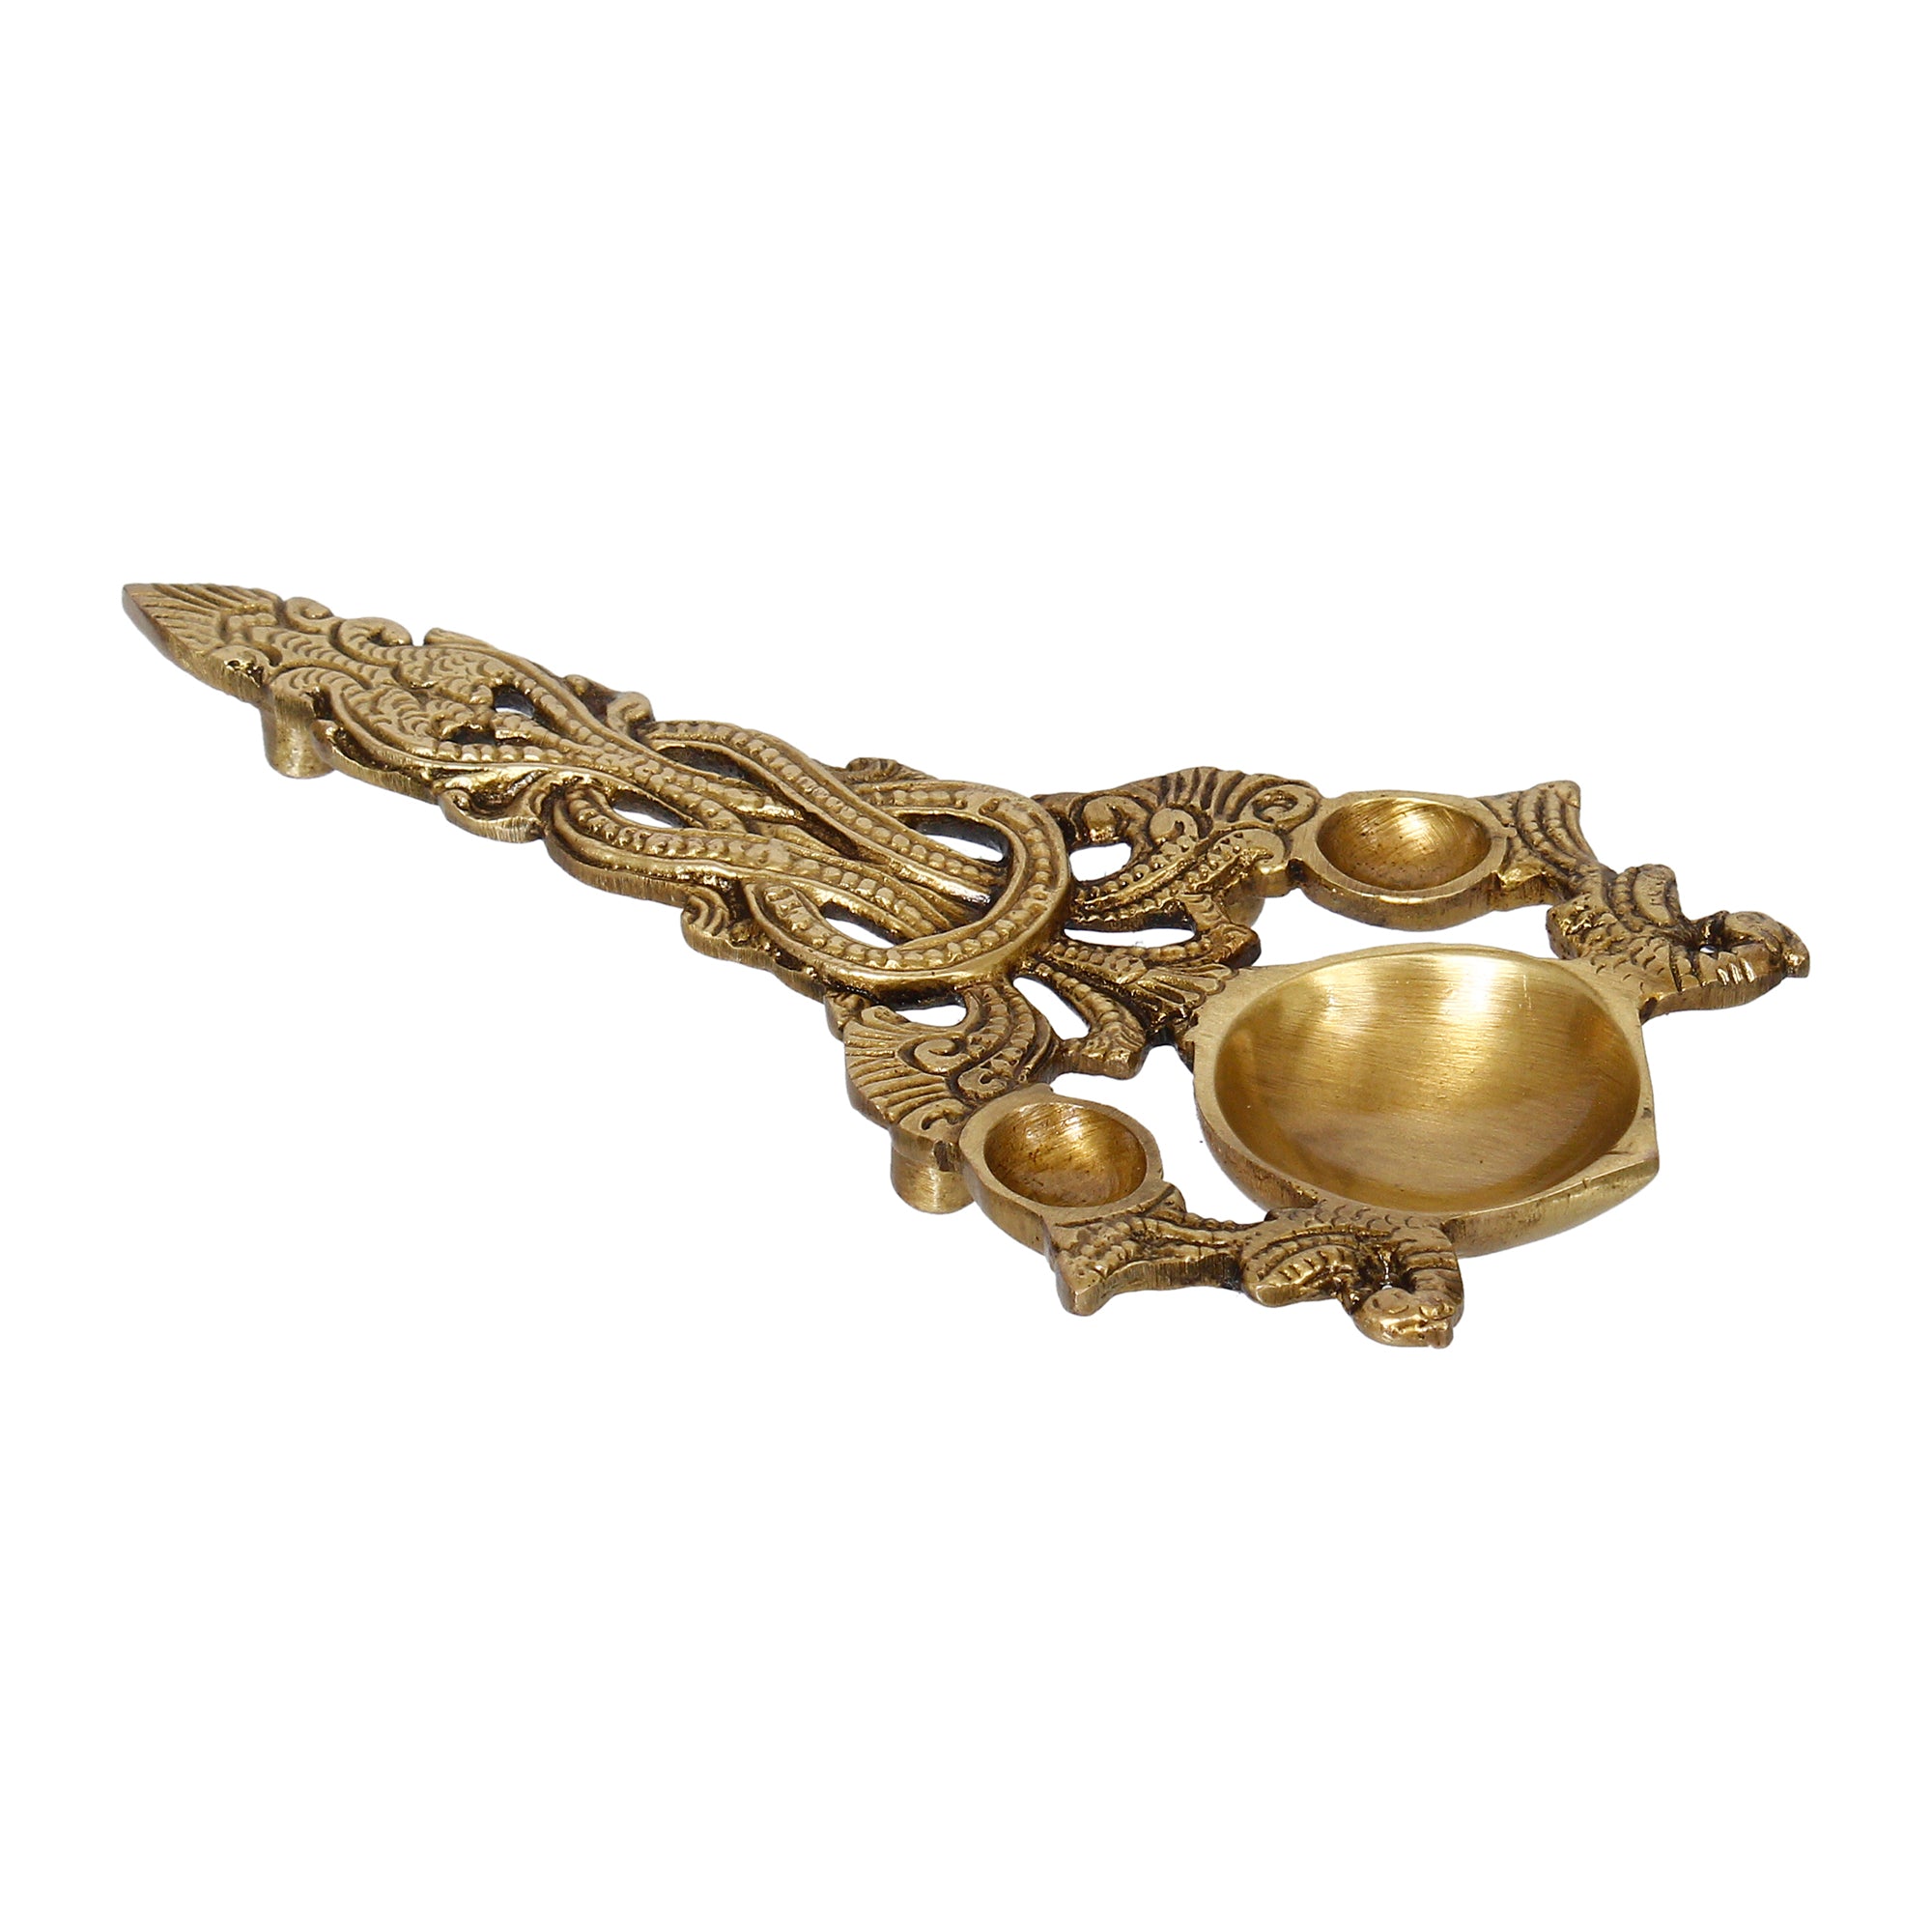 Golden Ethnic Carved Brass Diya With Handle For Pooja Room And Temples 4